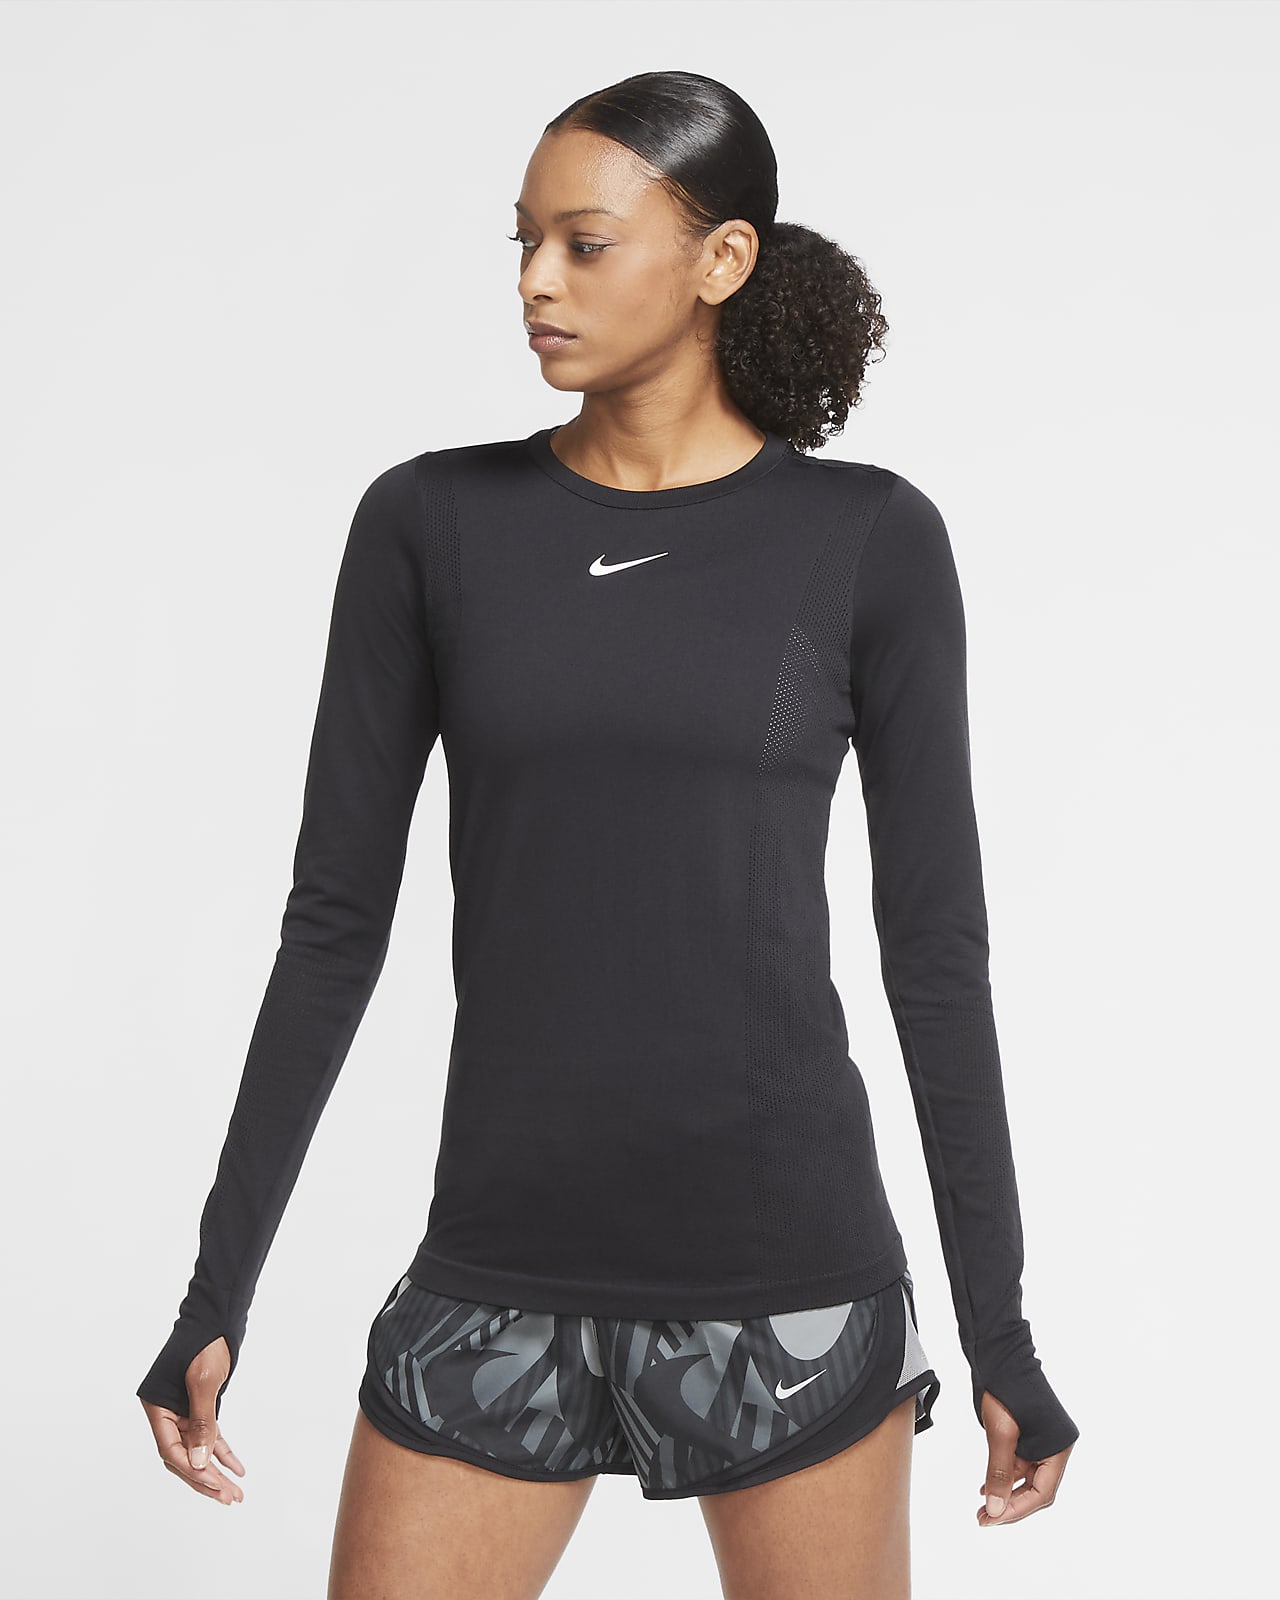 Buy > nike long sleeve with thumb holes > in stock